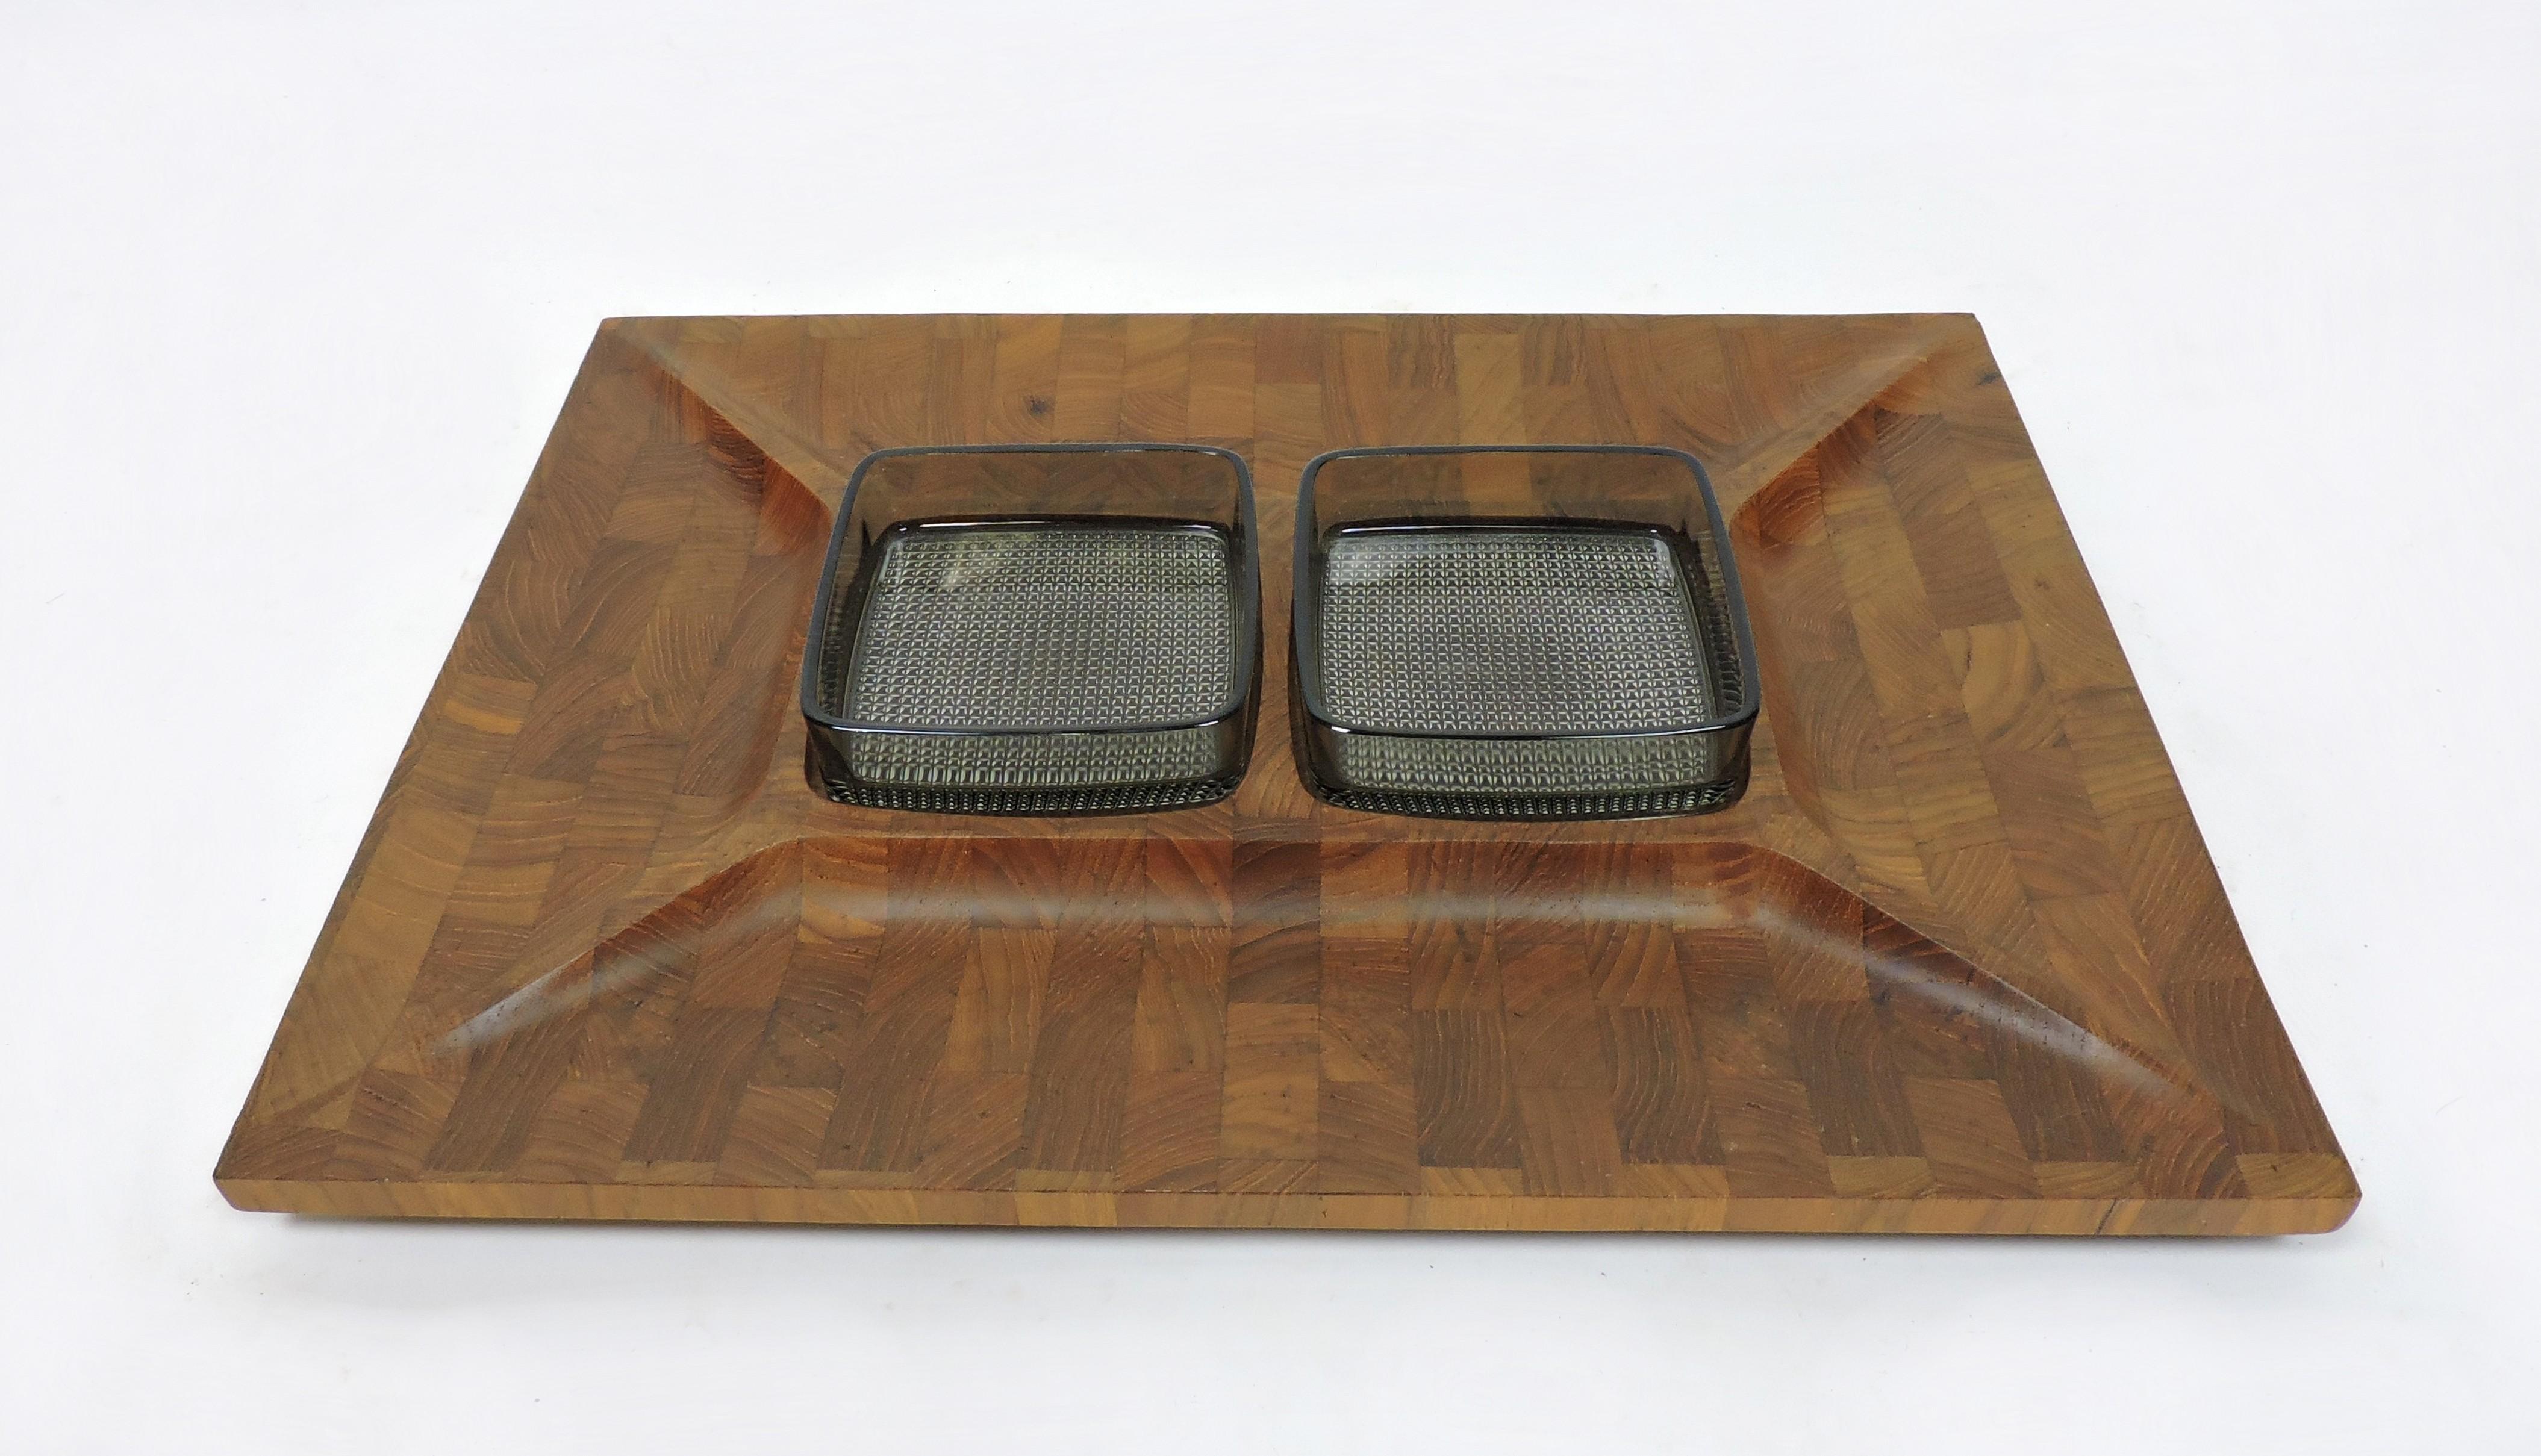 Digsmed Large Danish Modern Divided Teak Tray with 2 Glass Inserts For Sale 4